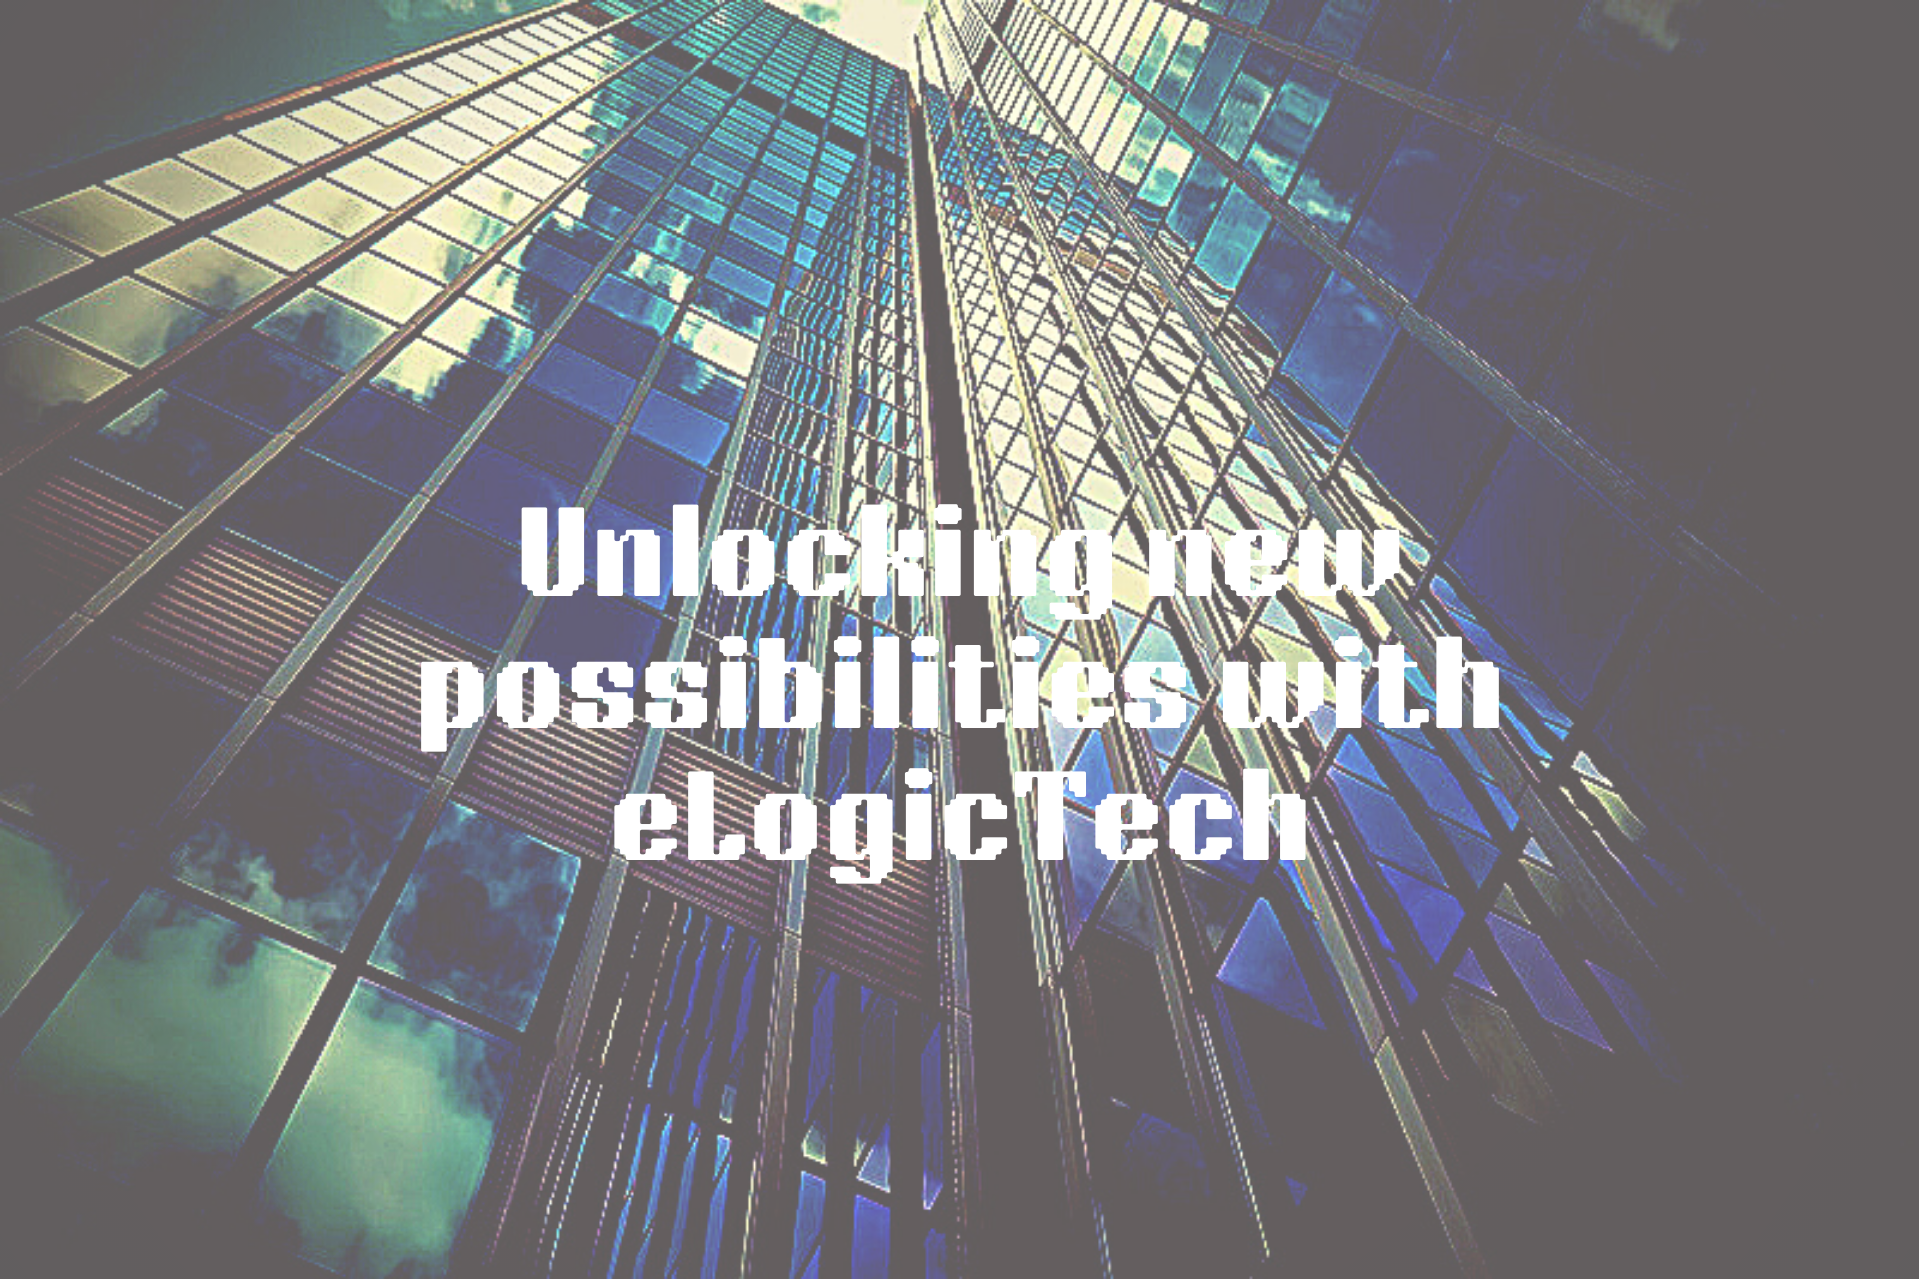 Embracing the Future - Unlocking New Possibilities with eLogictech